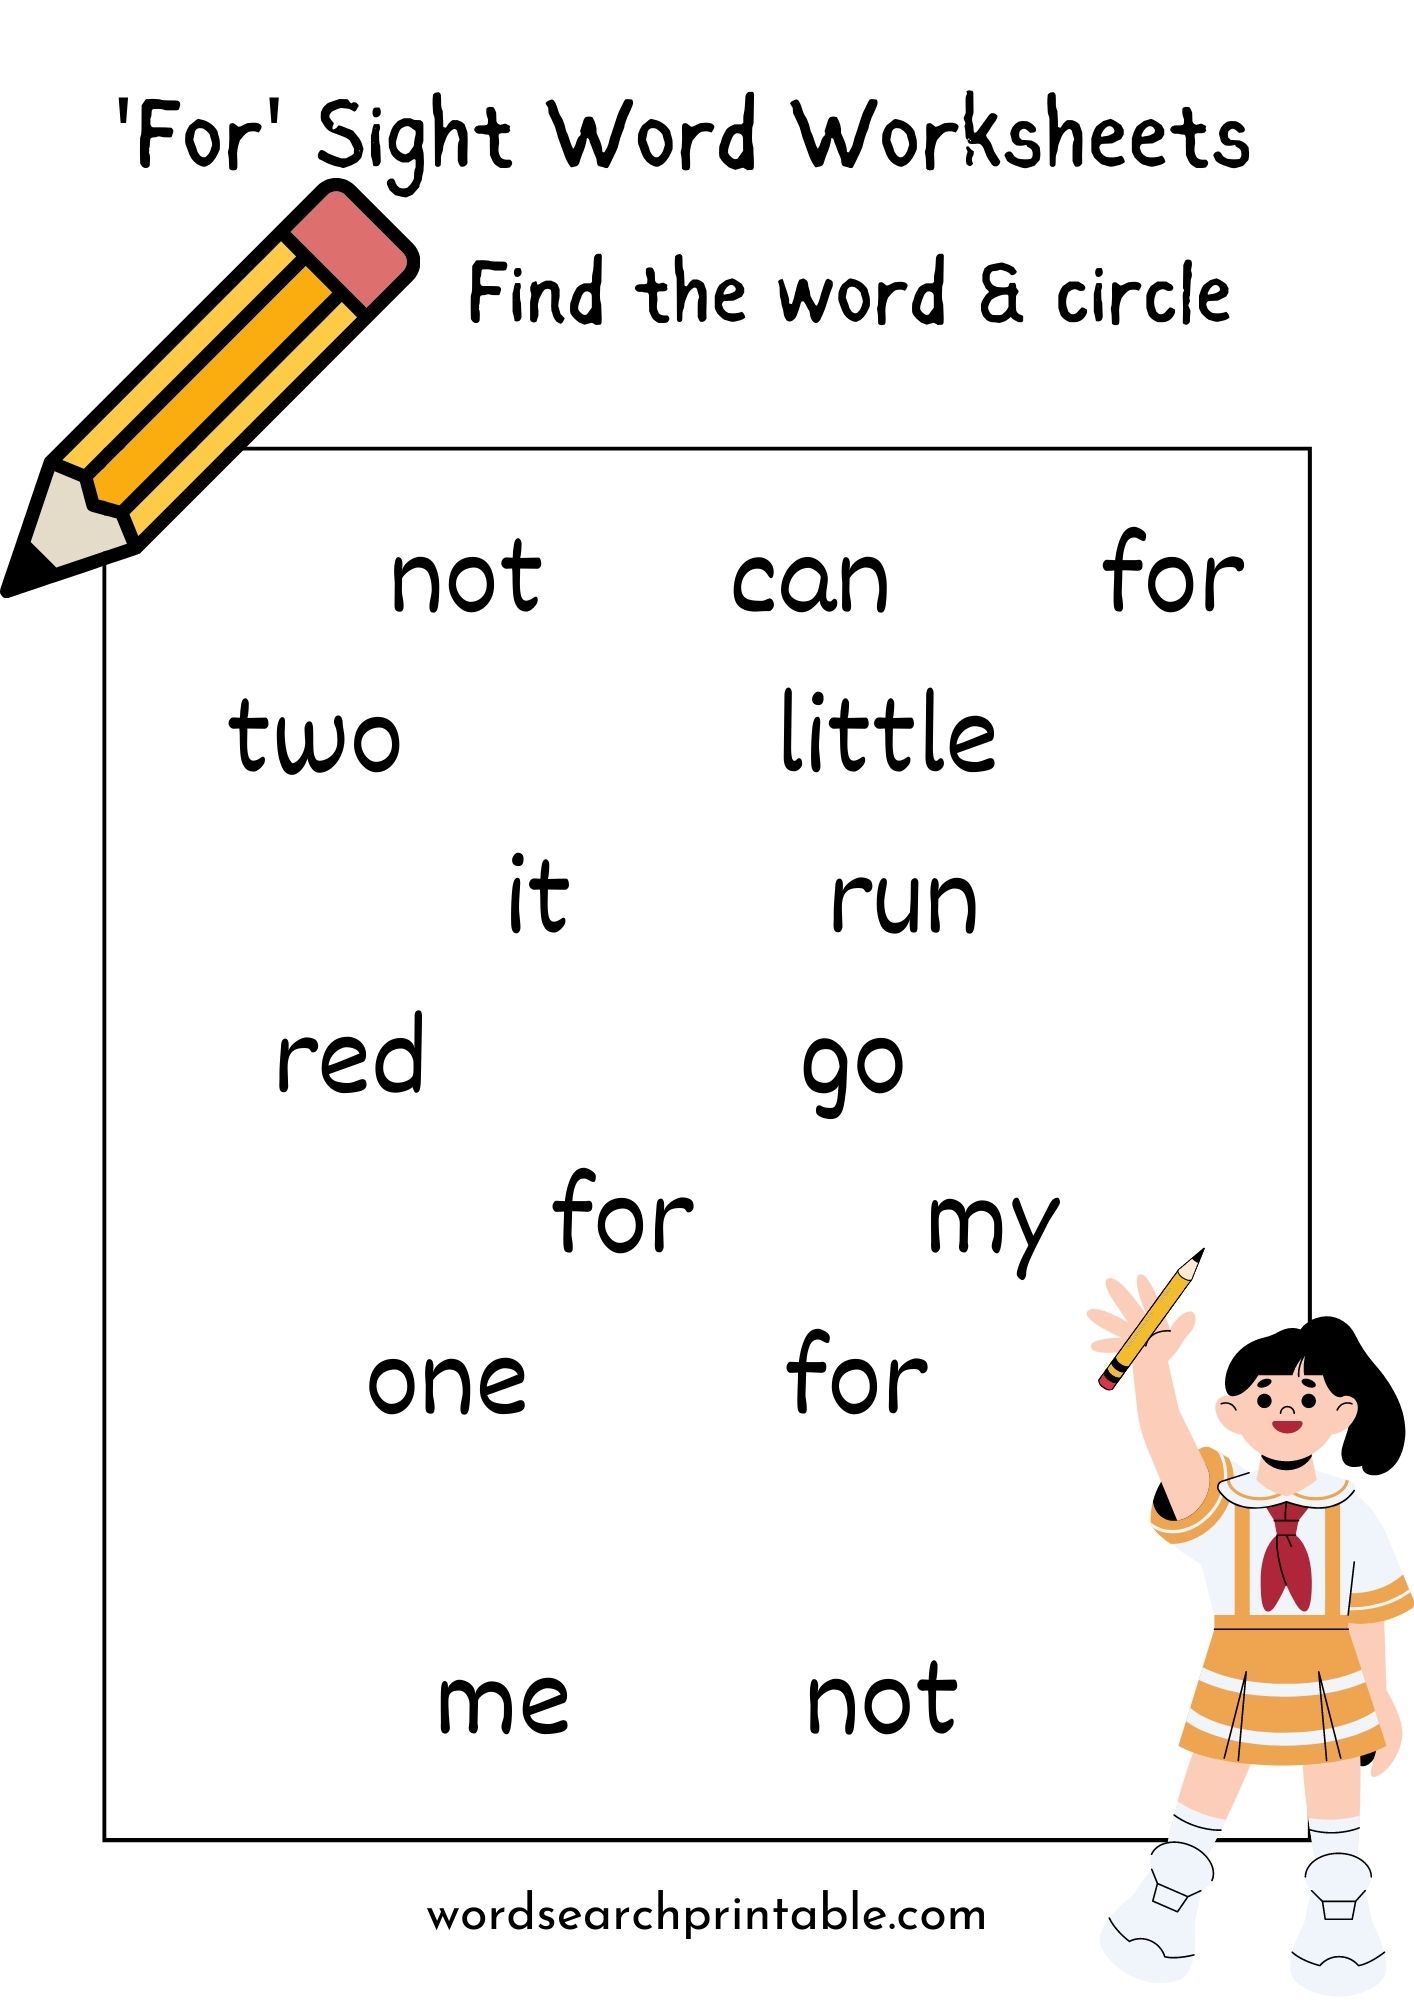 Find the sight word For and circle it